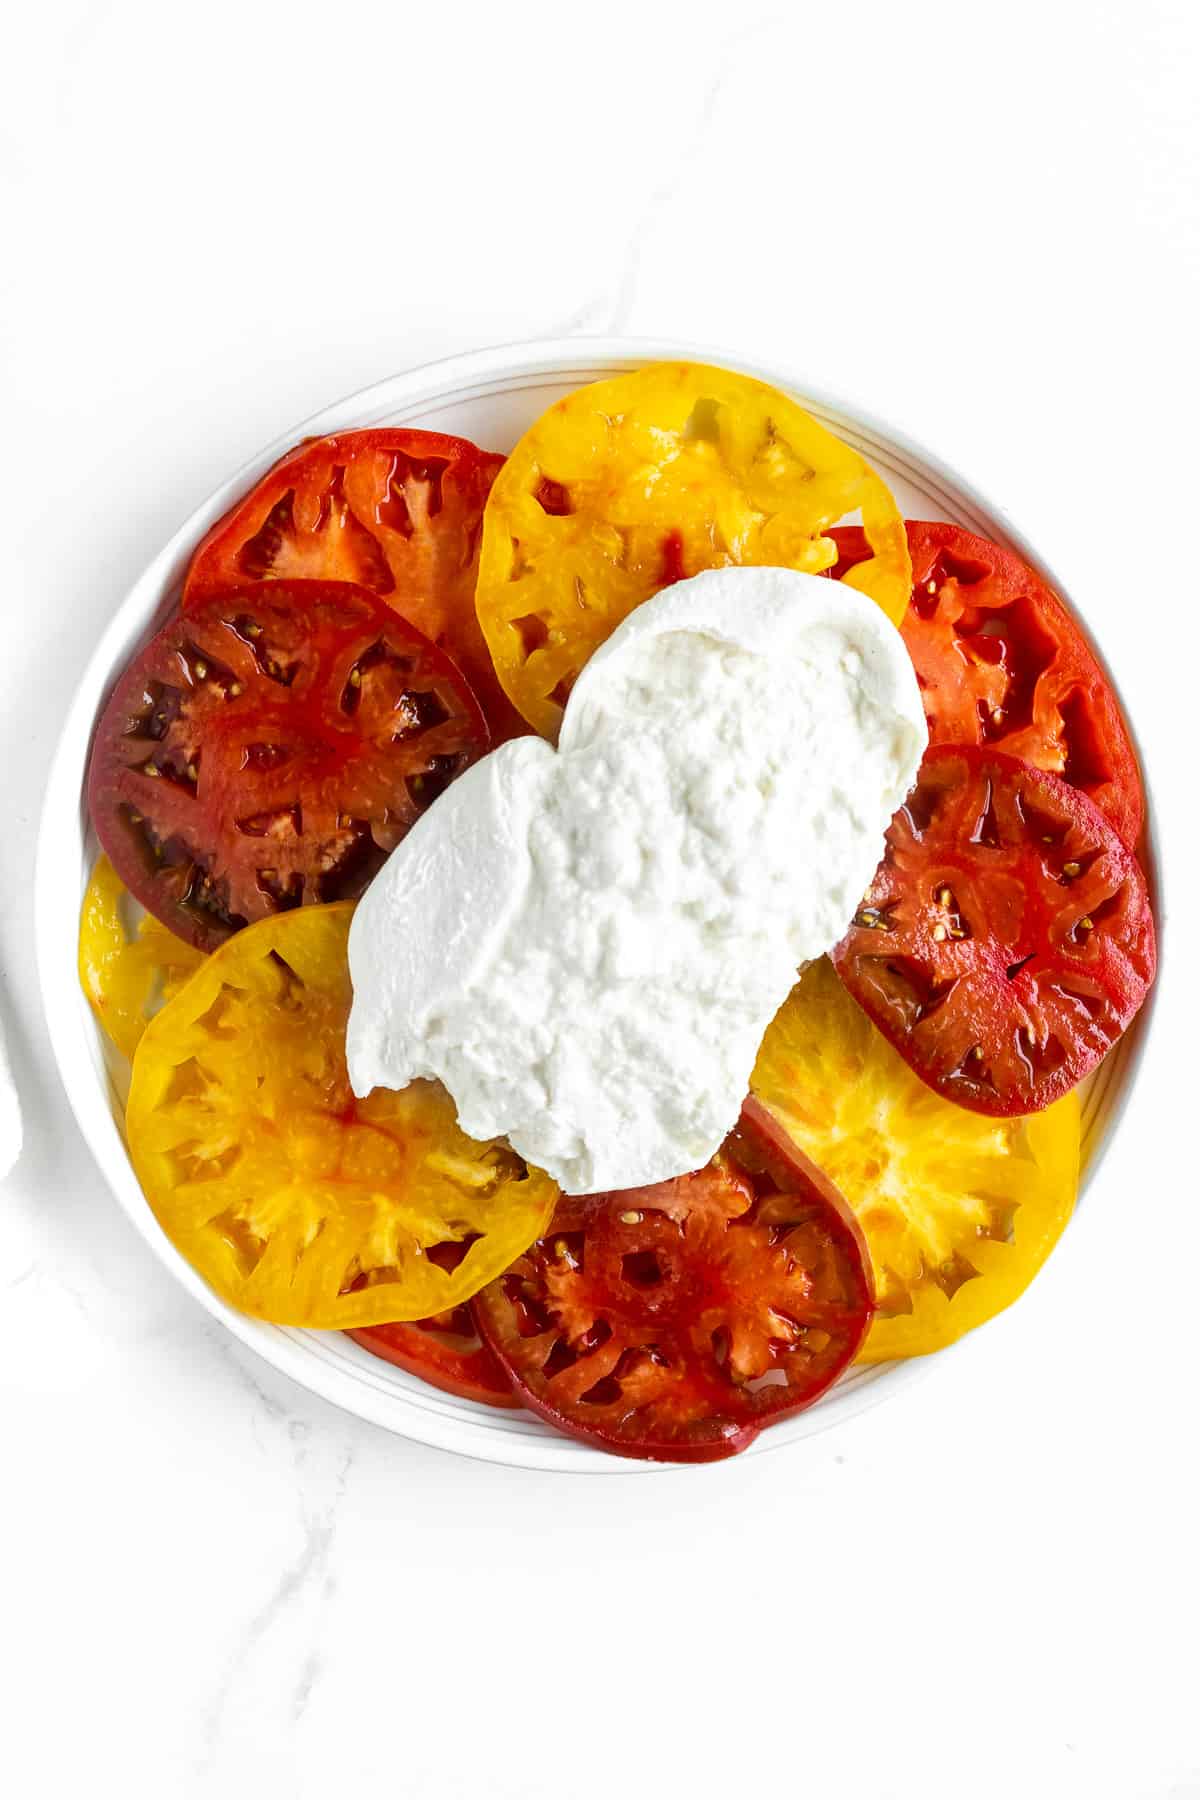 Sliced tomatoes on platter topped with burrata.